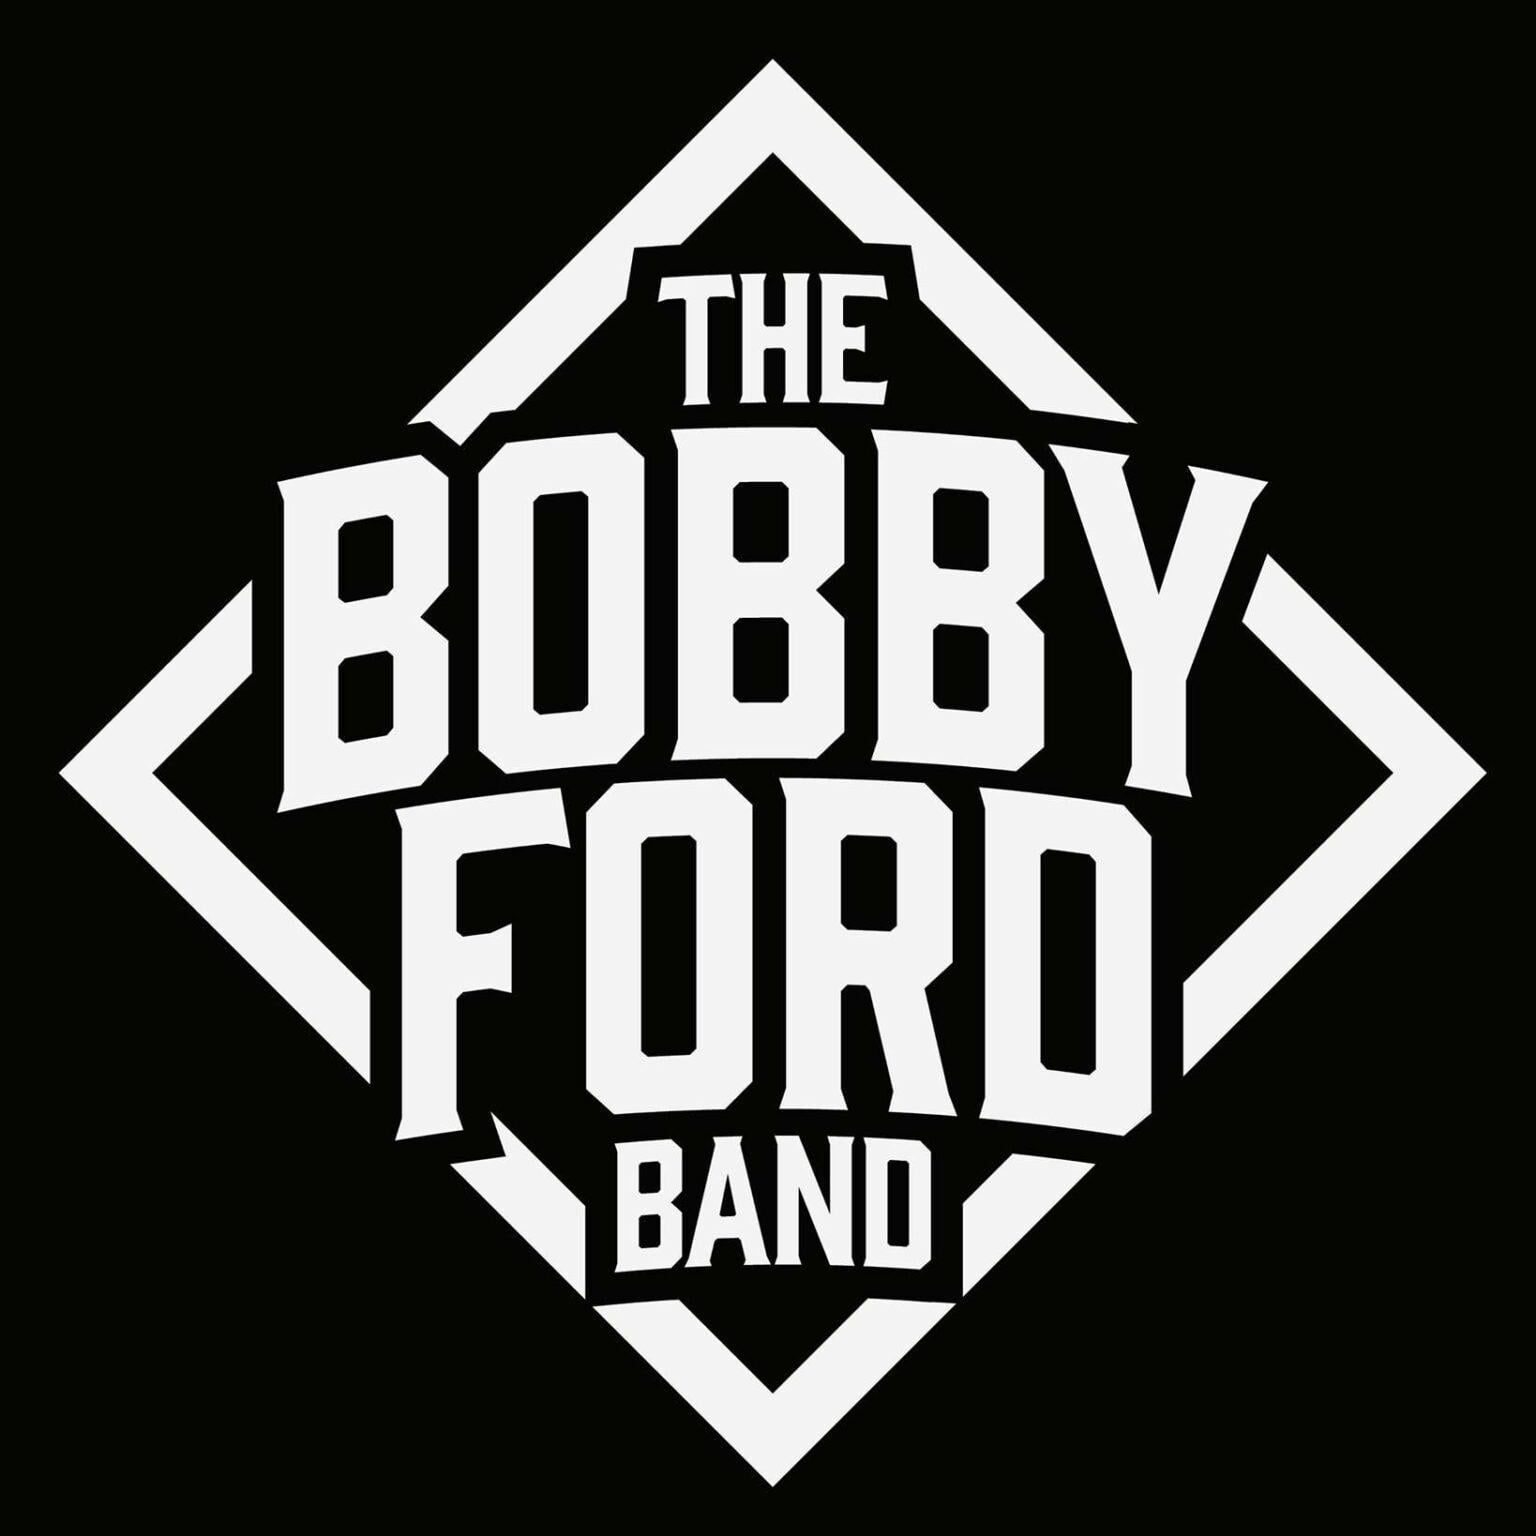 The Bobby Ford Band